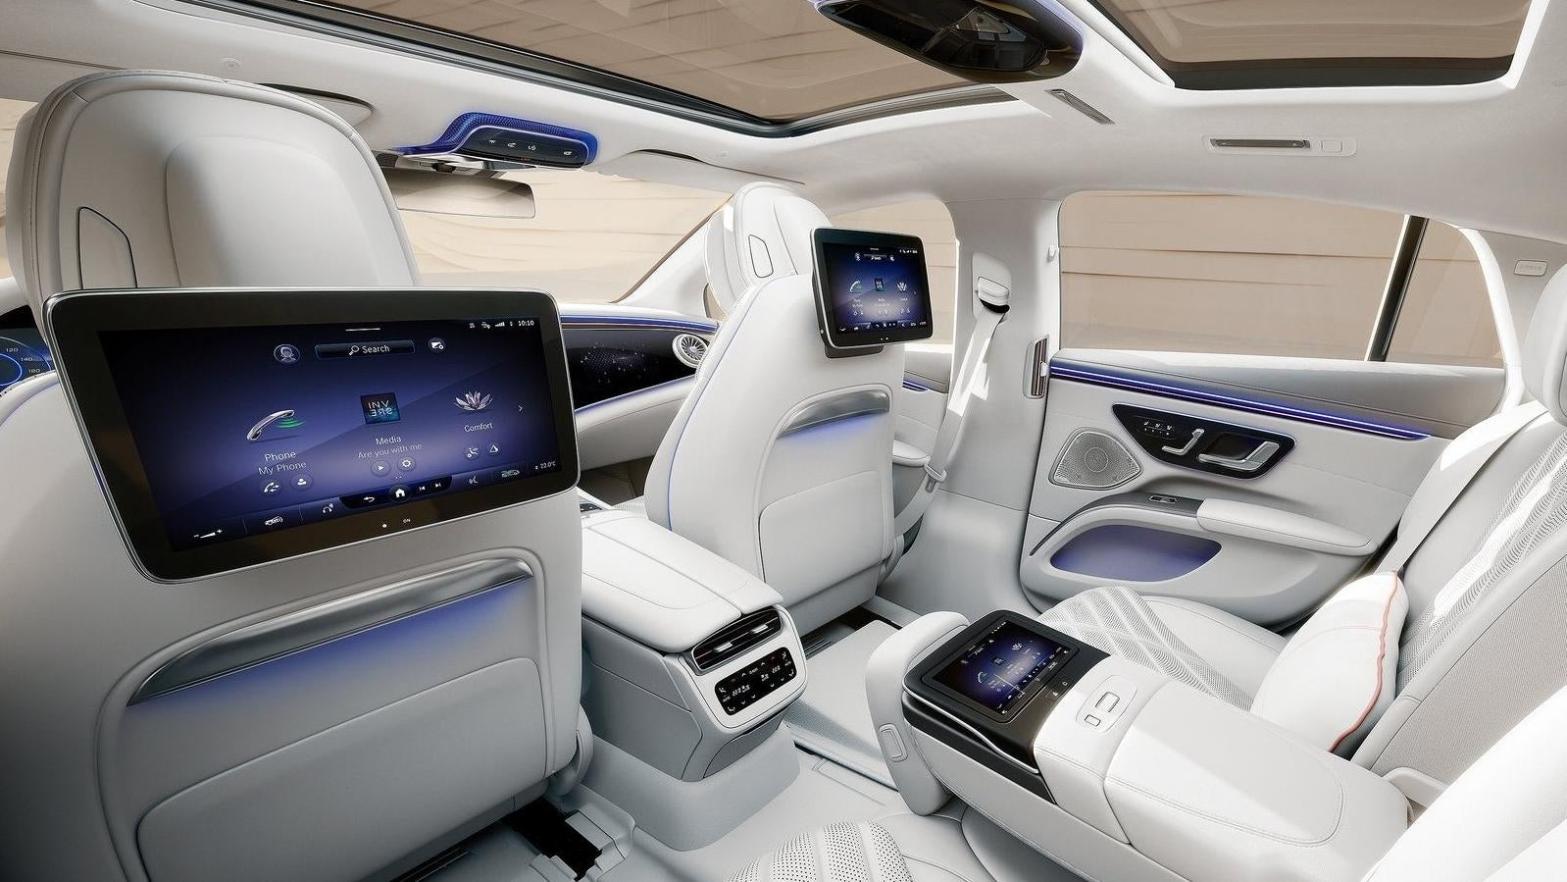 People Apparently Want More Screens Inside Their Cars? For In-Car Entertainment?